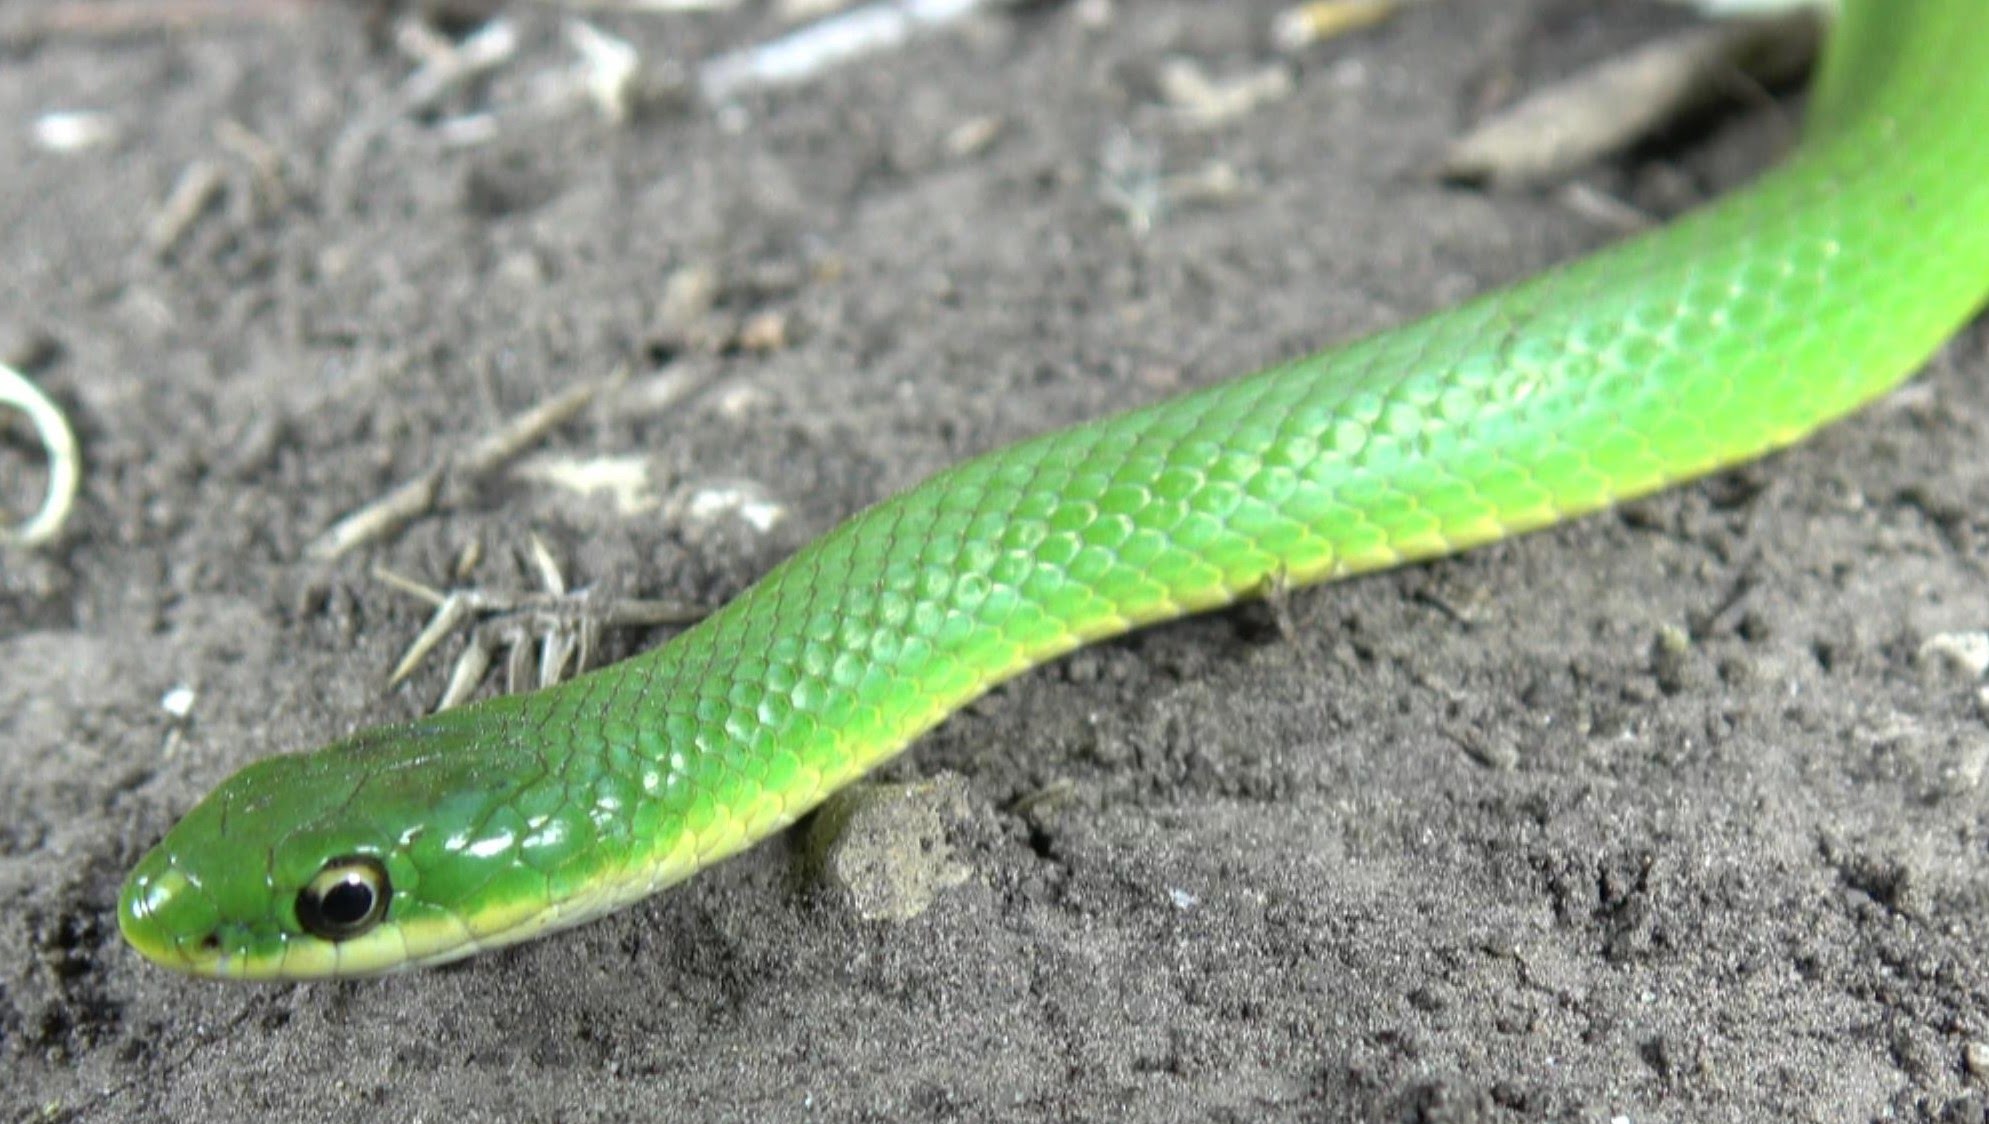 The Green Poop Snake: Chasing Reptiles & Amphibians! Nature, Travel ...